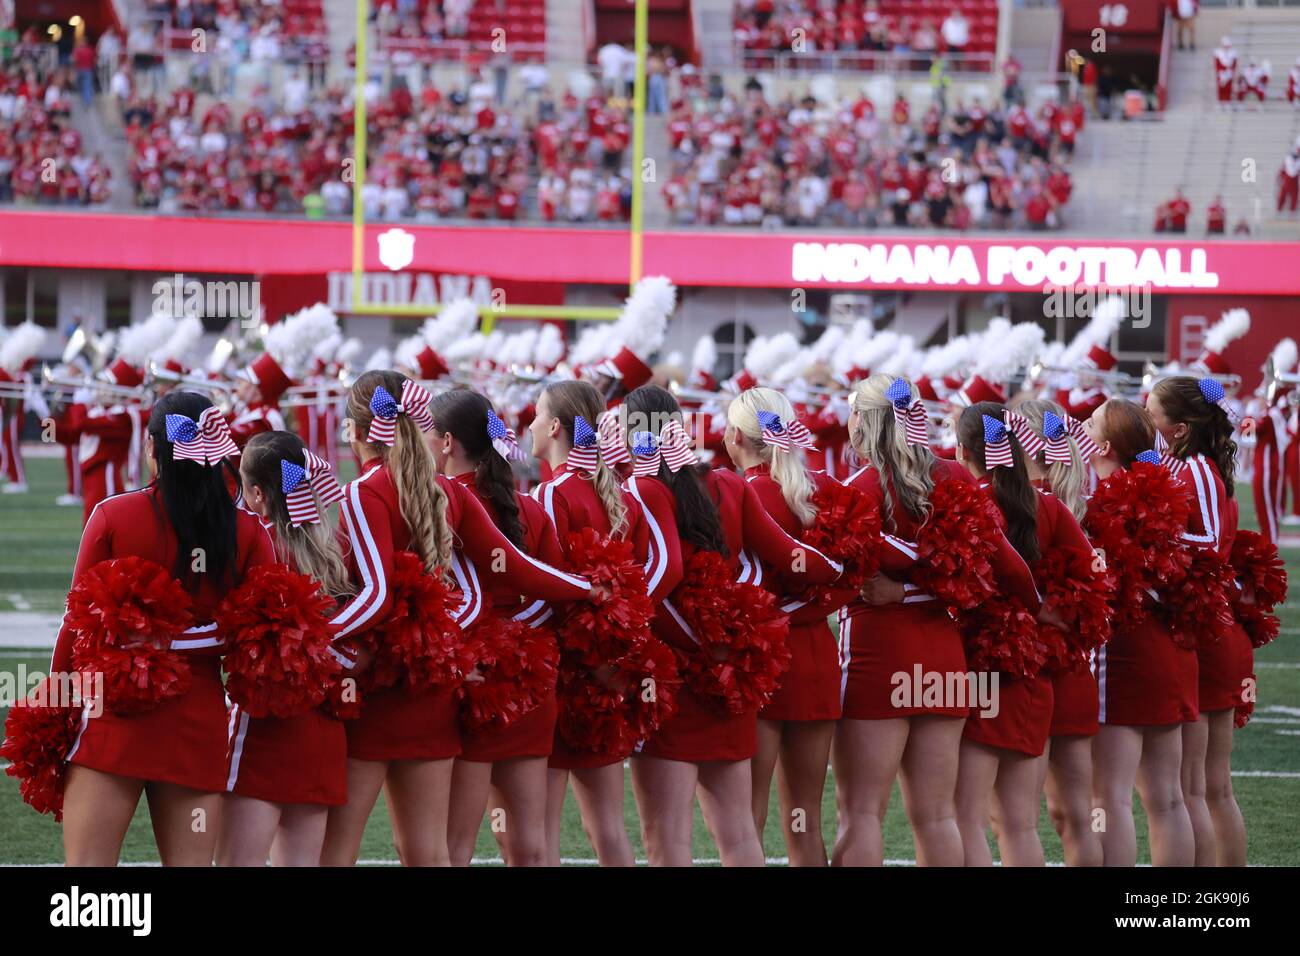 Indiana University cheerleaders wear American flag ribbons in their hair on the anniversary of 9/11 before IU plays against Idaho during the NCAA football game at Memorial Stadium in Bloomington.The Hoosiers beat the Vandals 56-14. Stock Photo